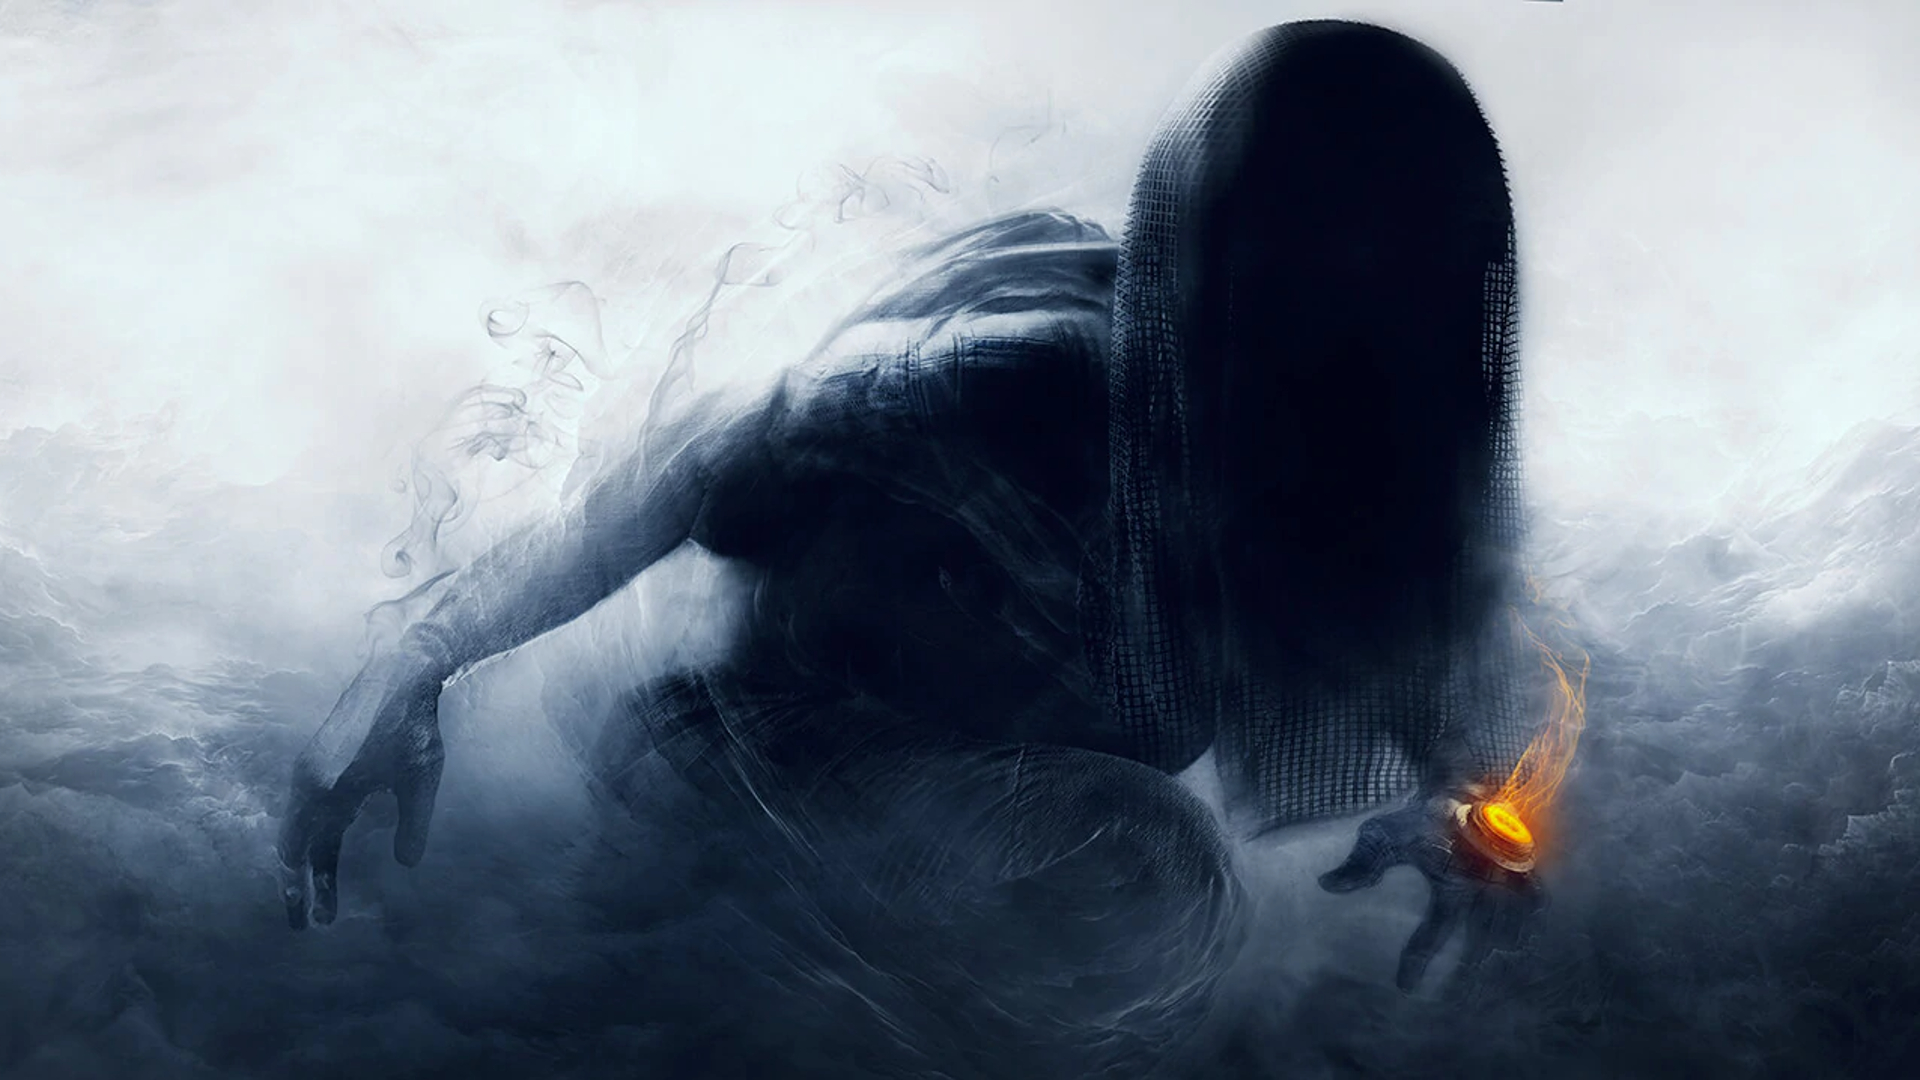 A dark, ghost-like presence with a fiery orange device on its left hand